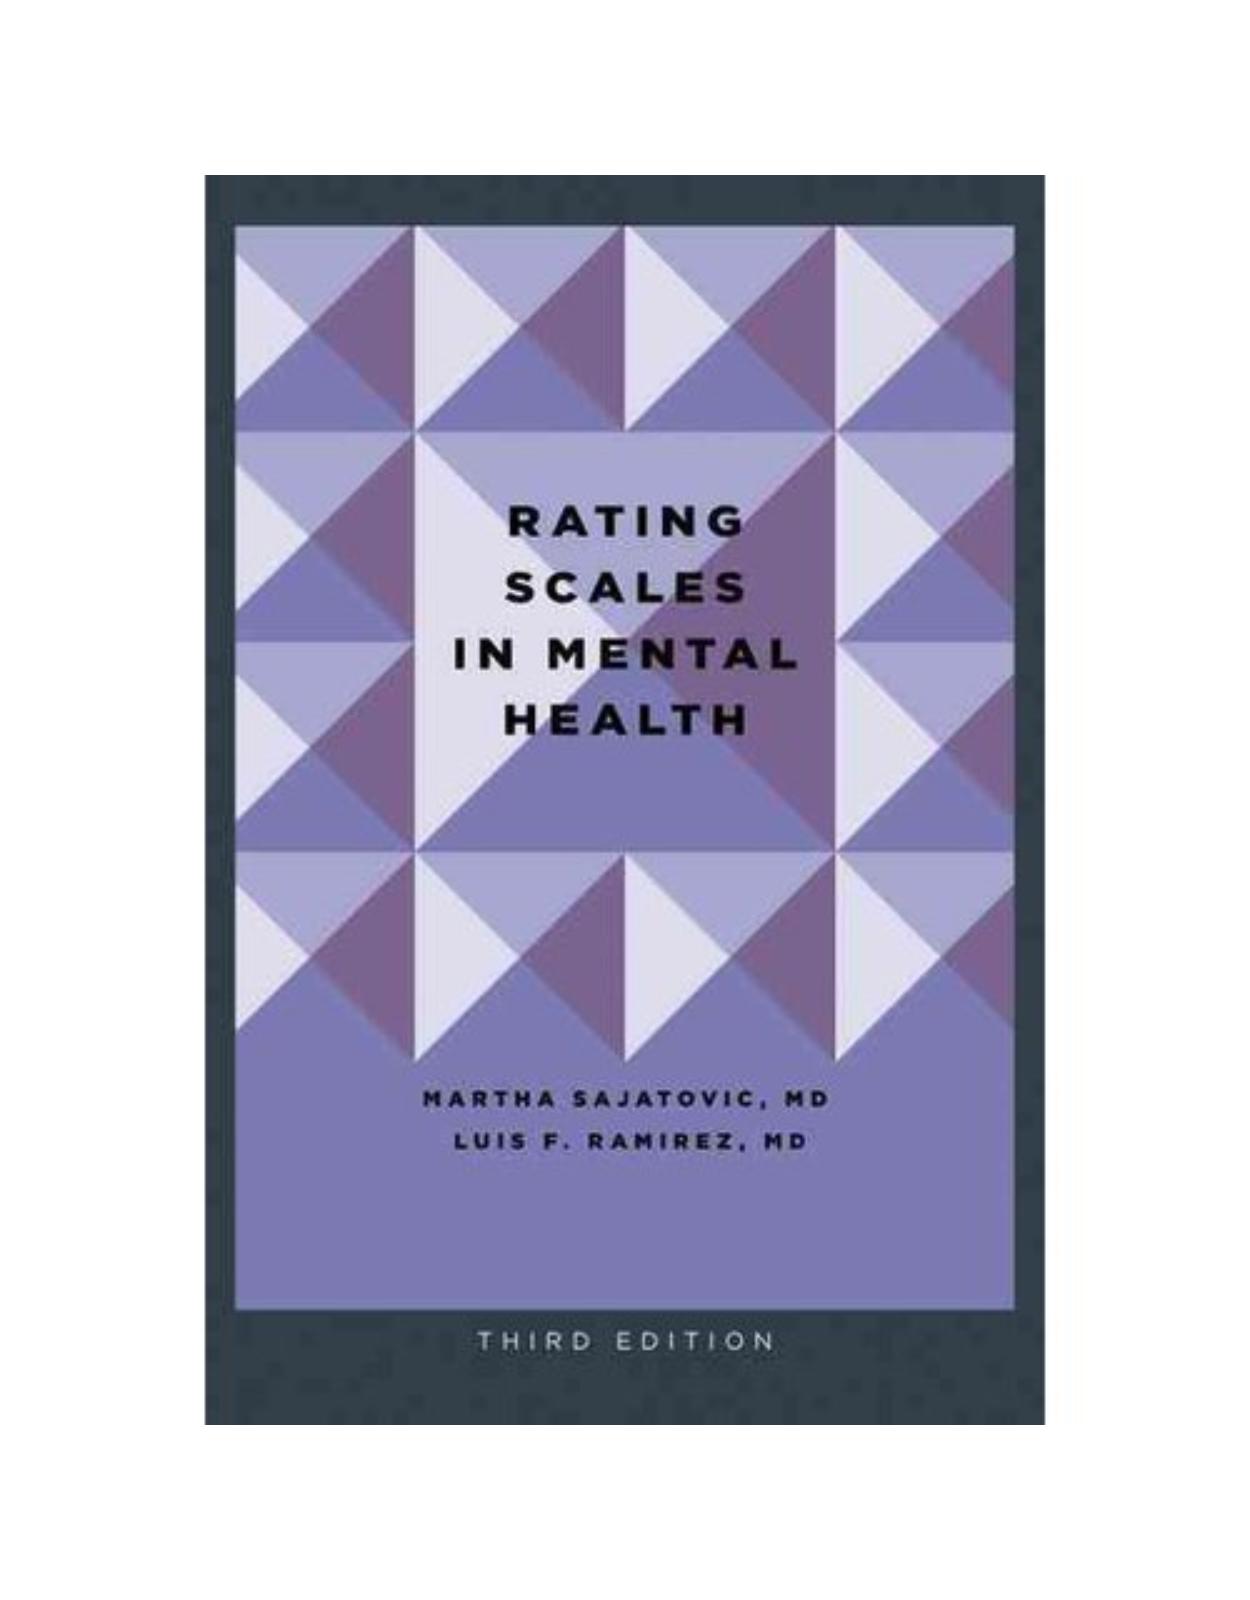 Rating Scales in Mental Health. Third Edition